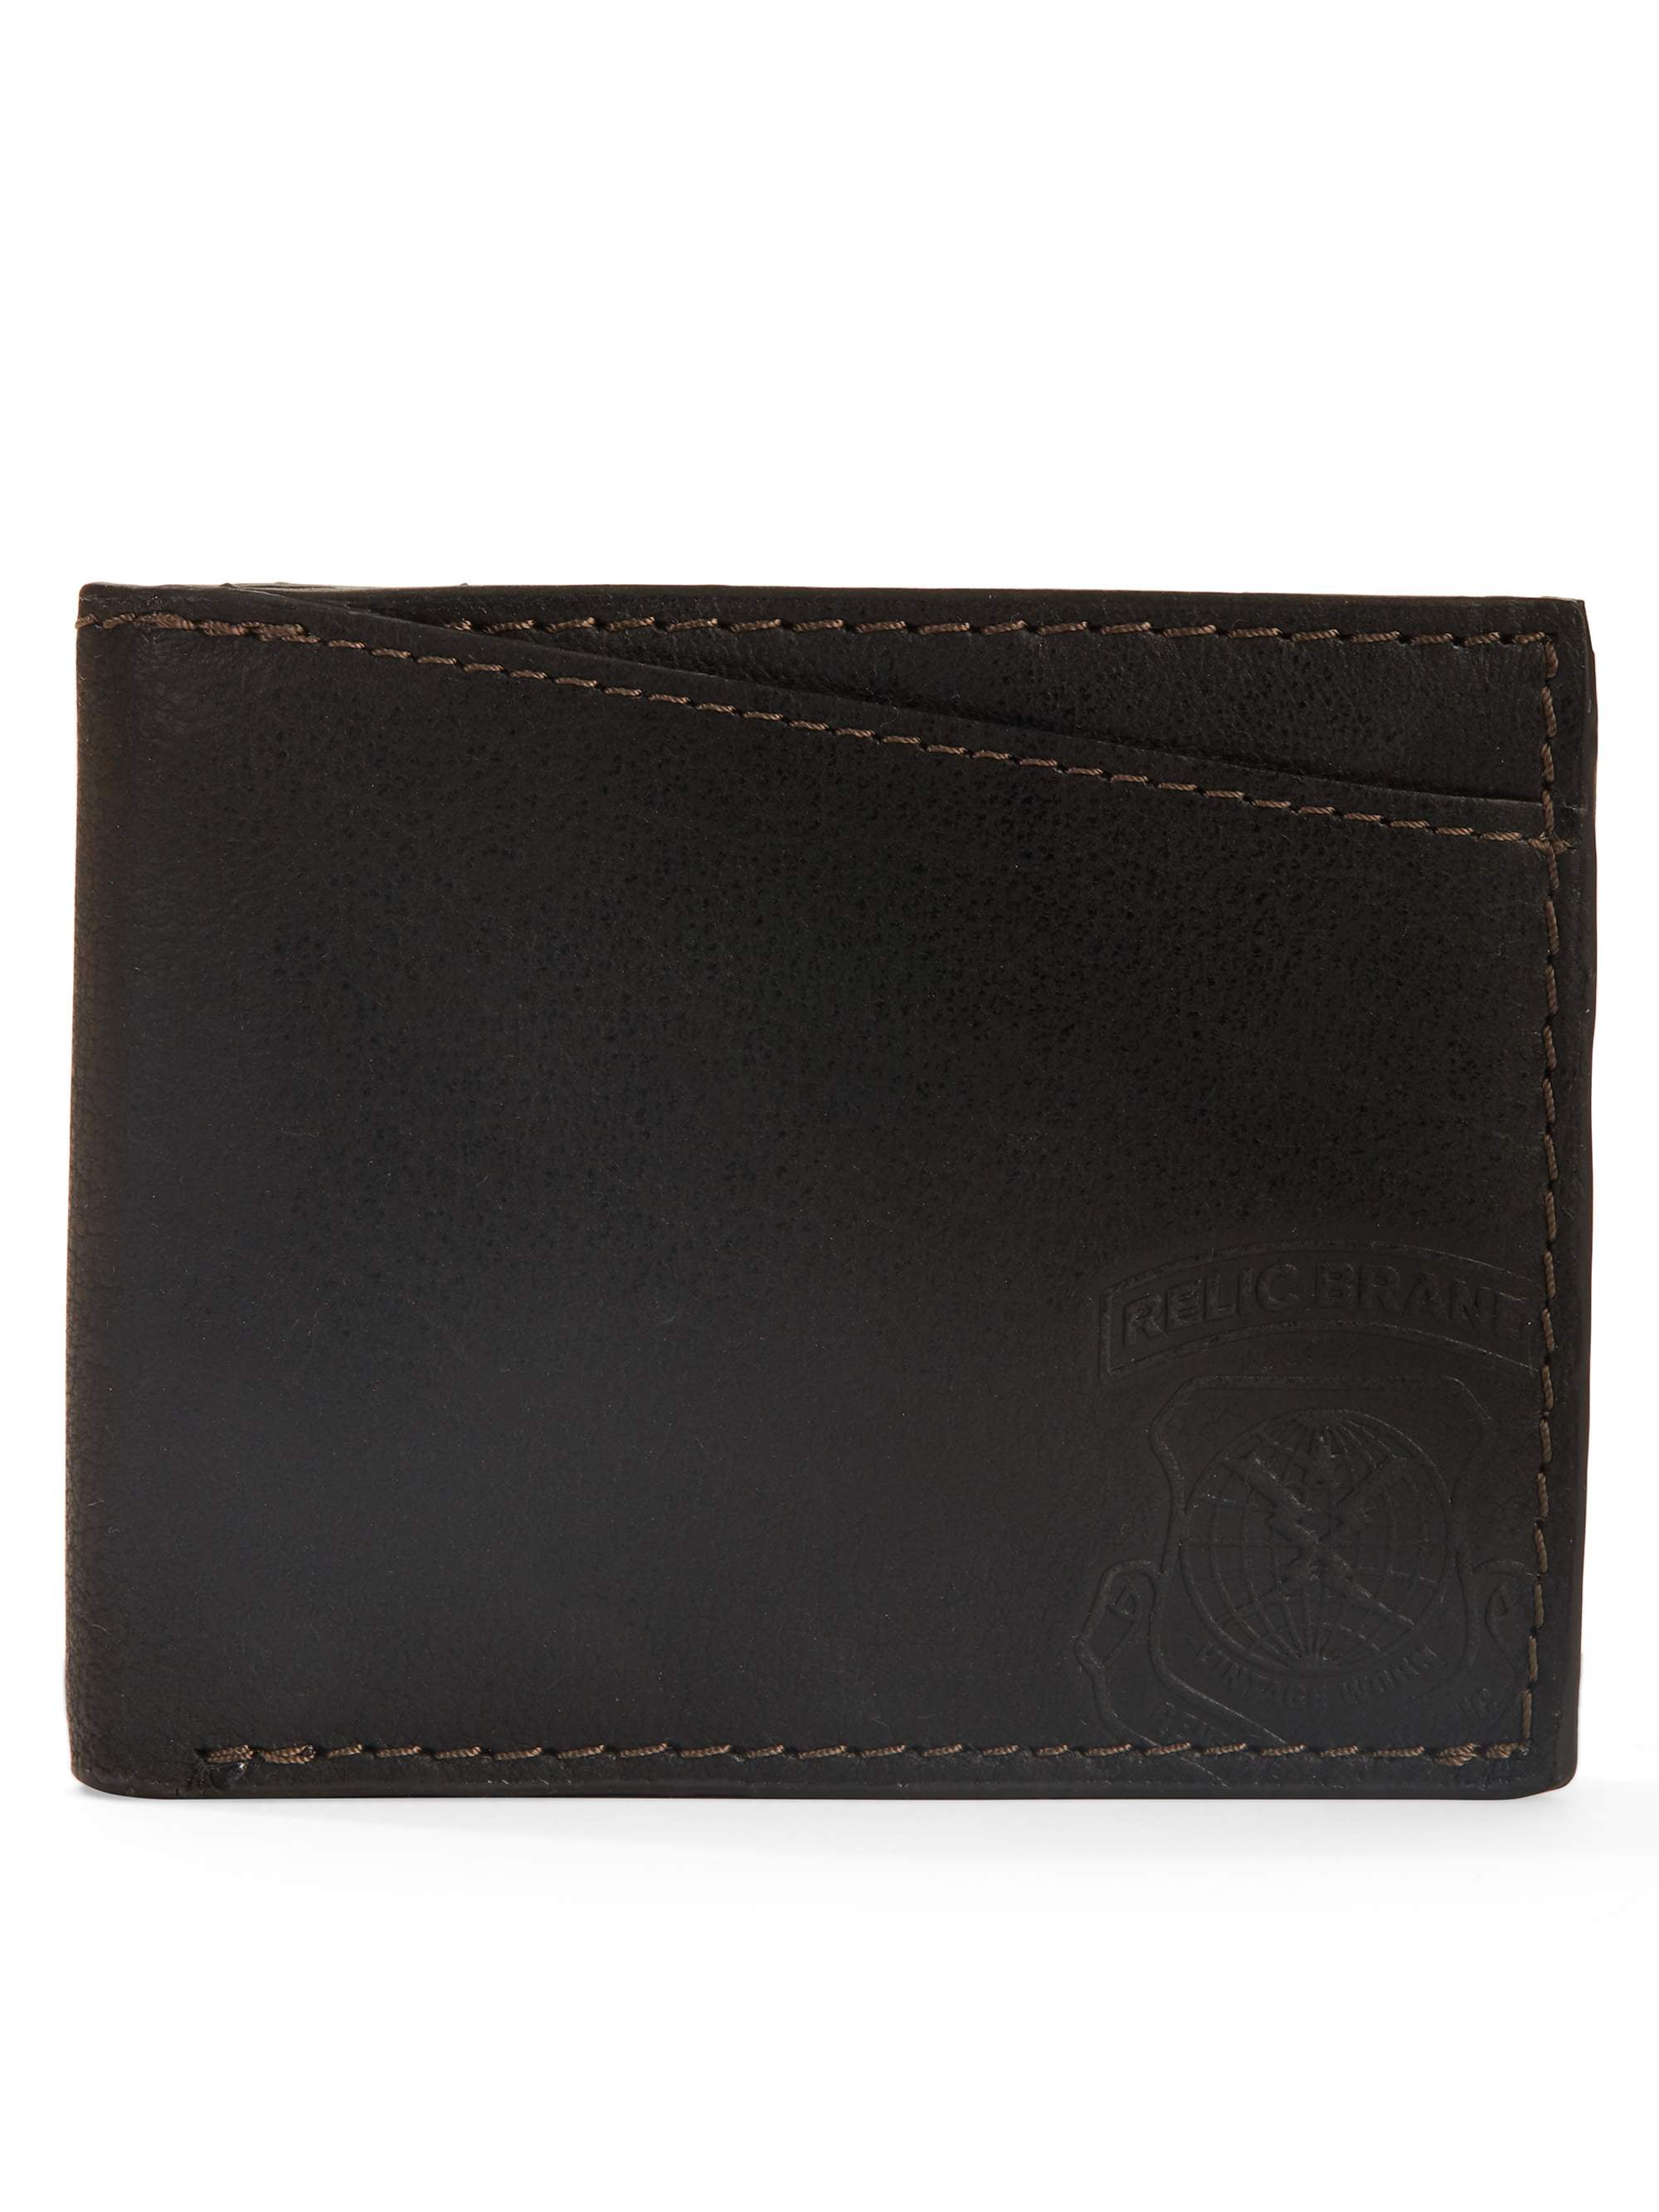 Relic - RELIC by Fossil Hatch Traveler Men's Wallet with Gift Box ...